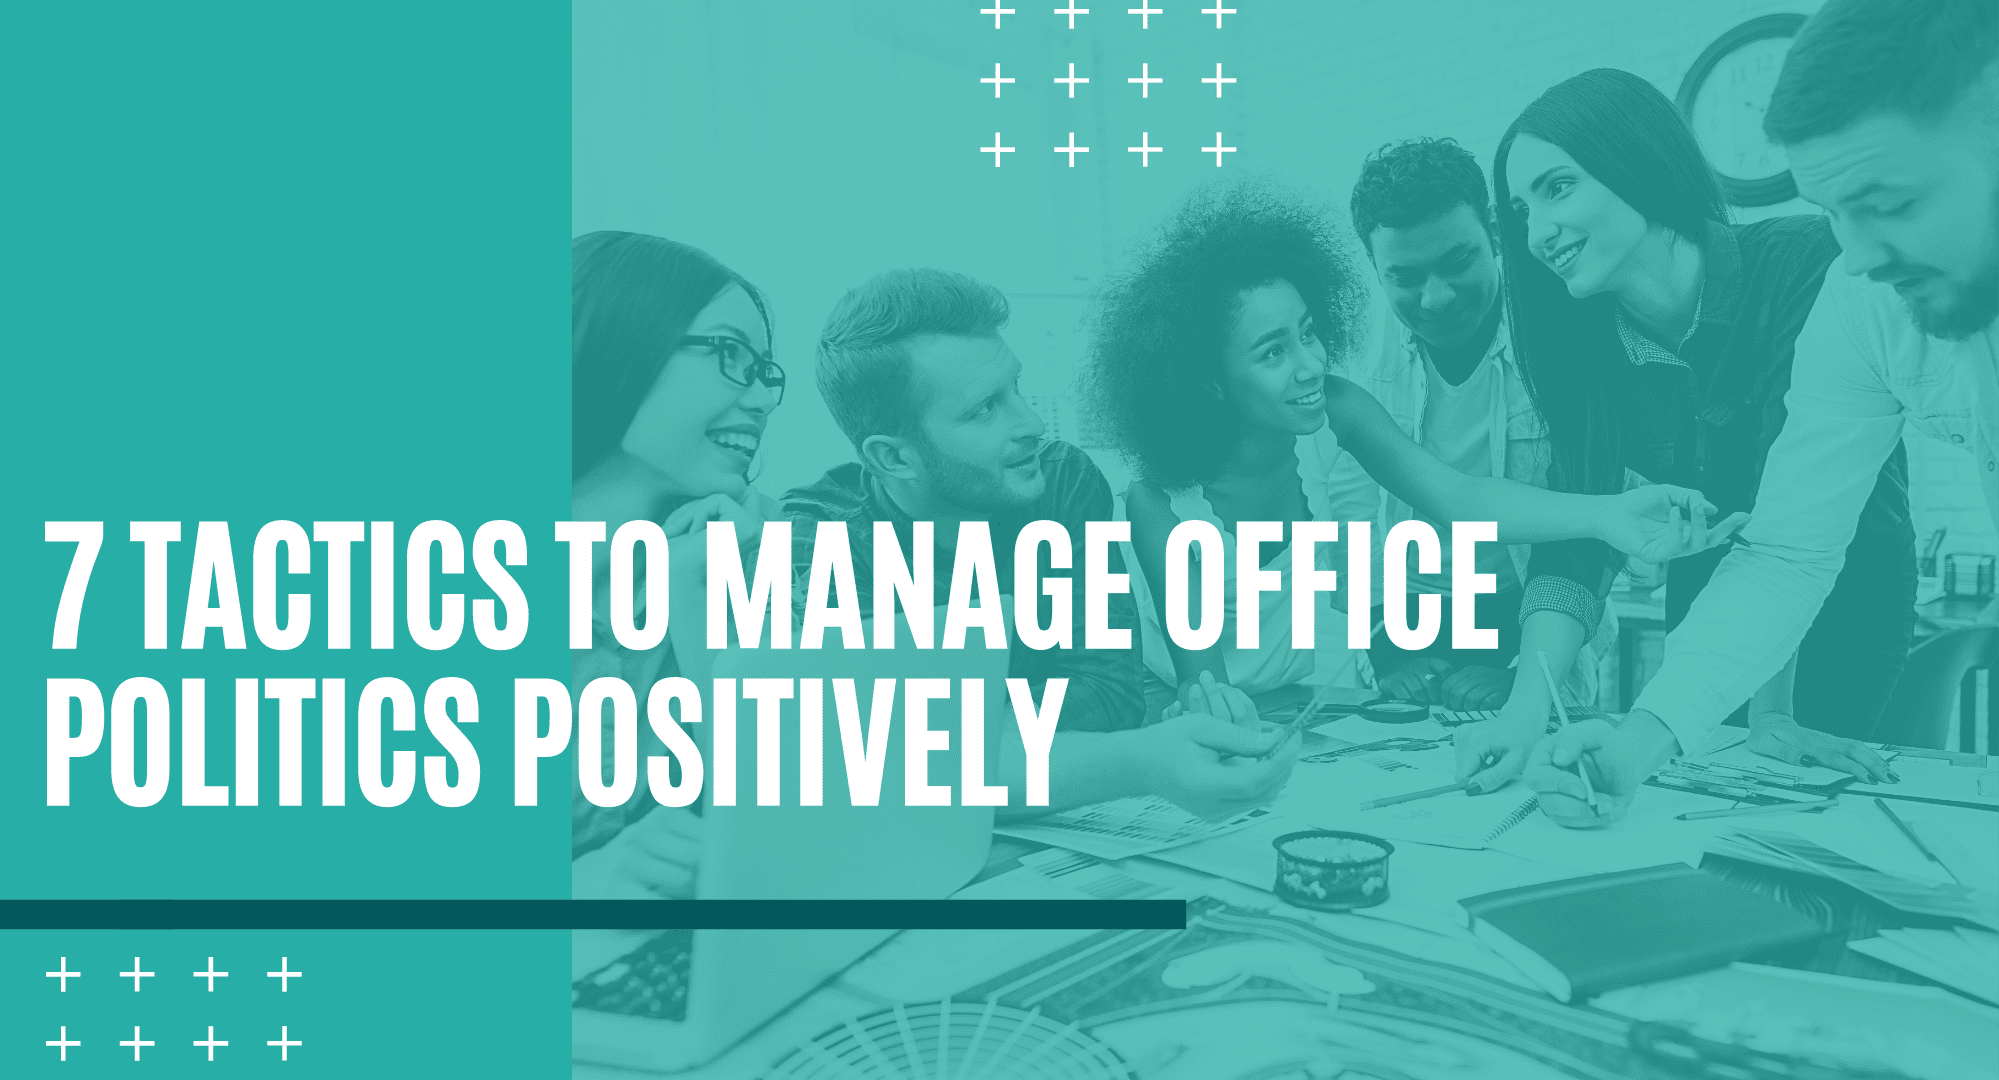 7 tactics to manage office politics positicvely. How to manage office politics positively. Tips on how to manage office politics positively.